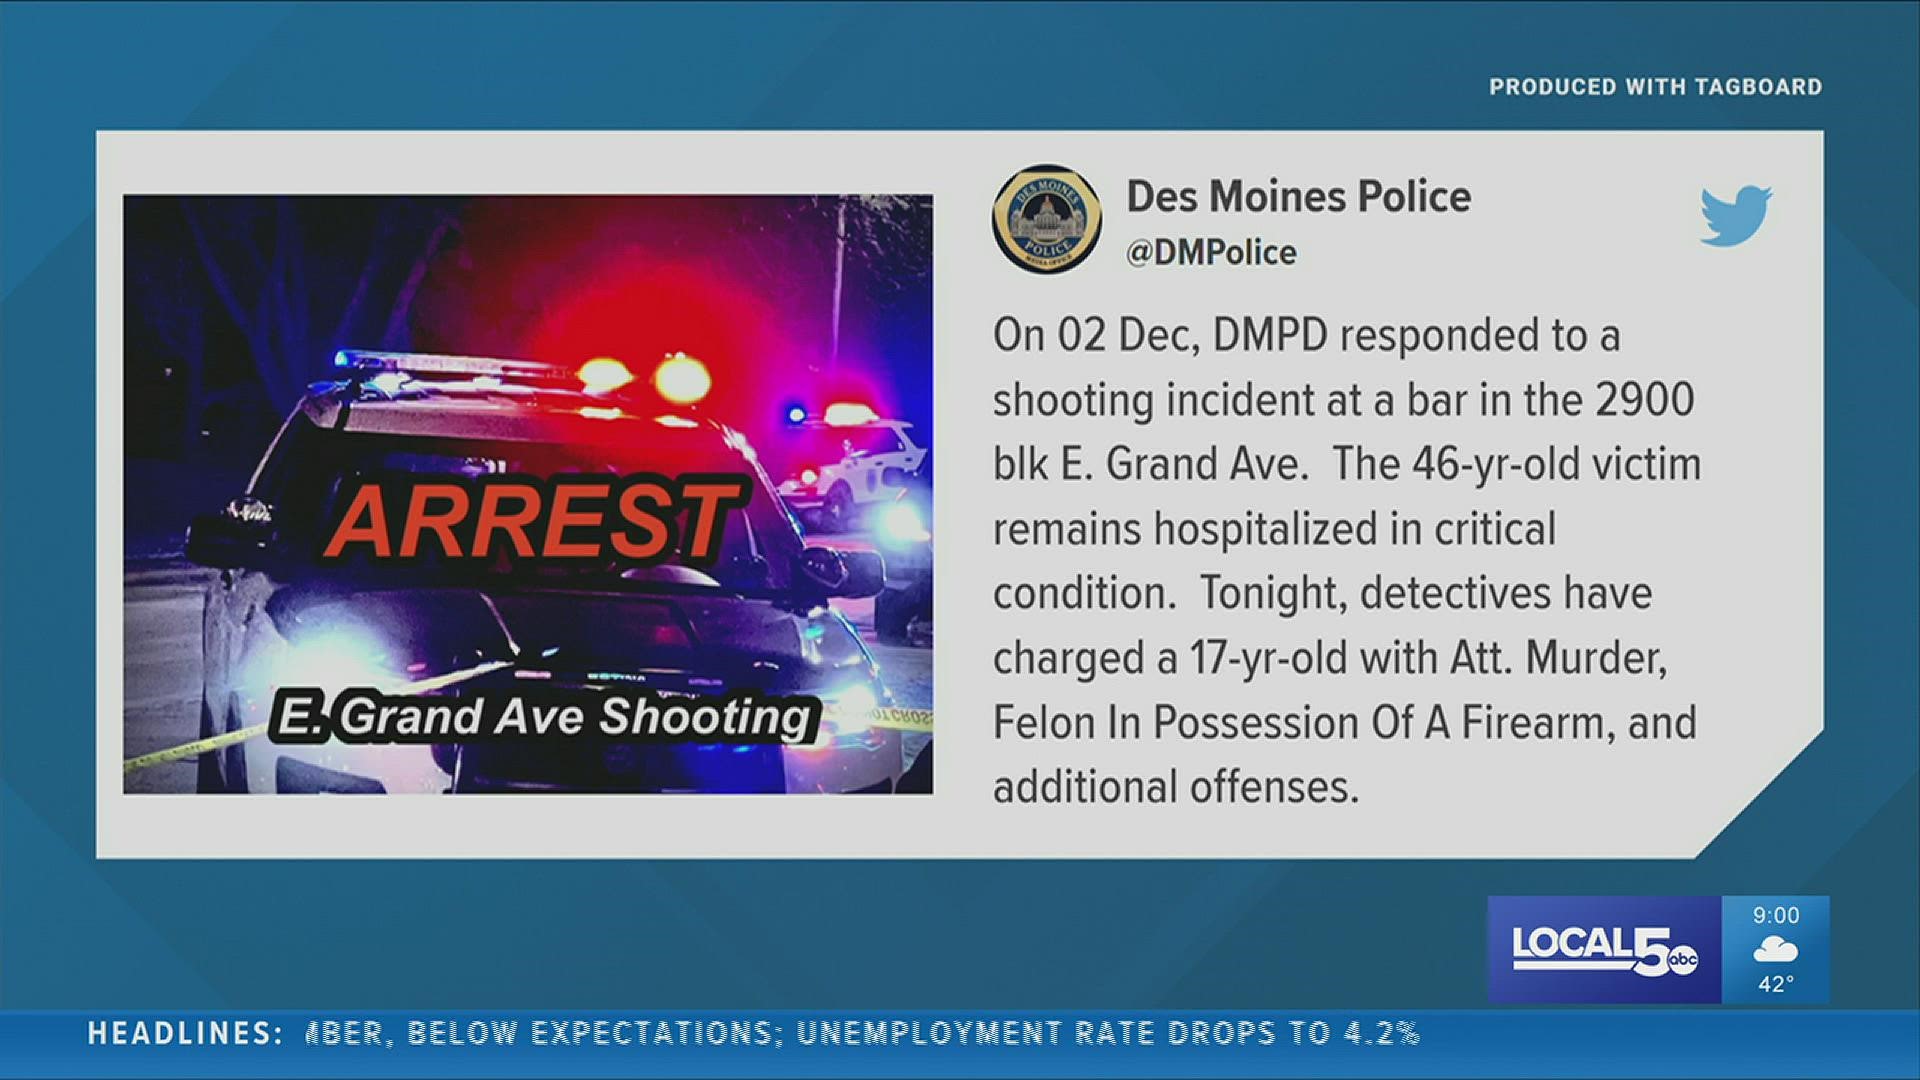 Des Moines police said a 17-year-old faces an Attempted Murder charge, among others, following a shooting at a bar near the Iowa State Fairgrounds Dec. 2.